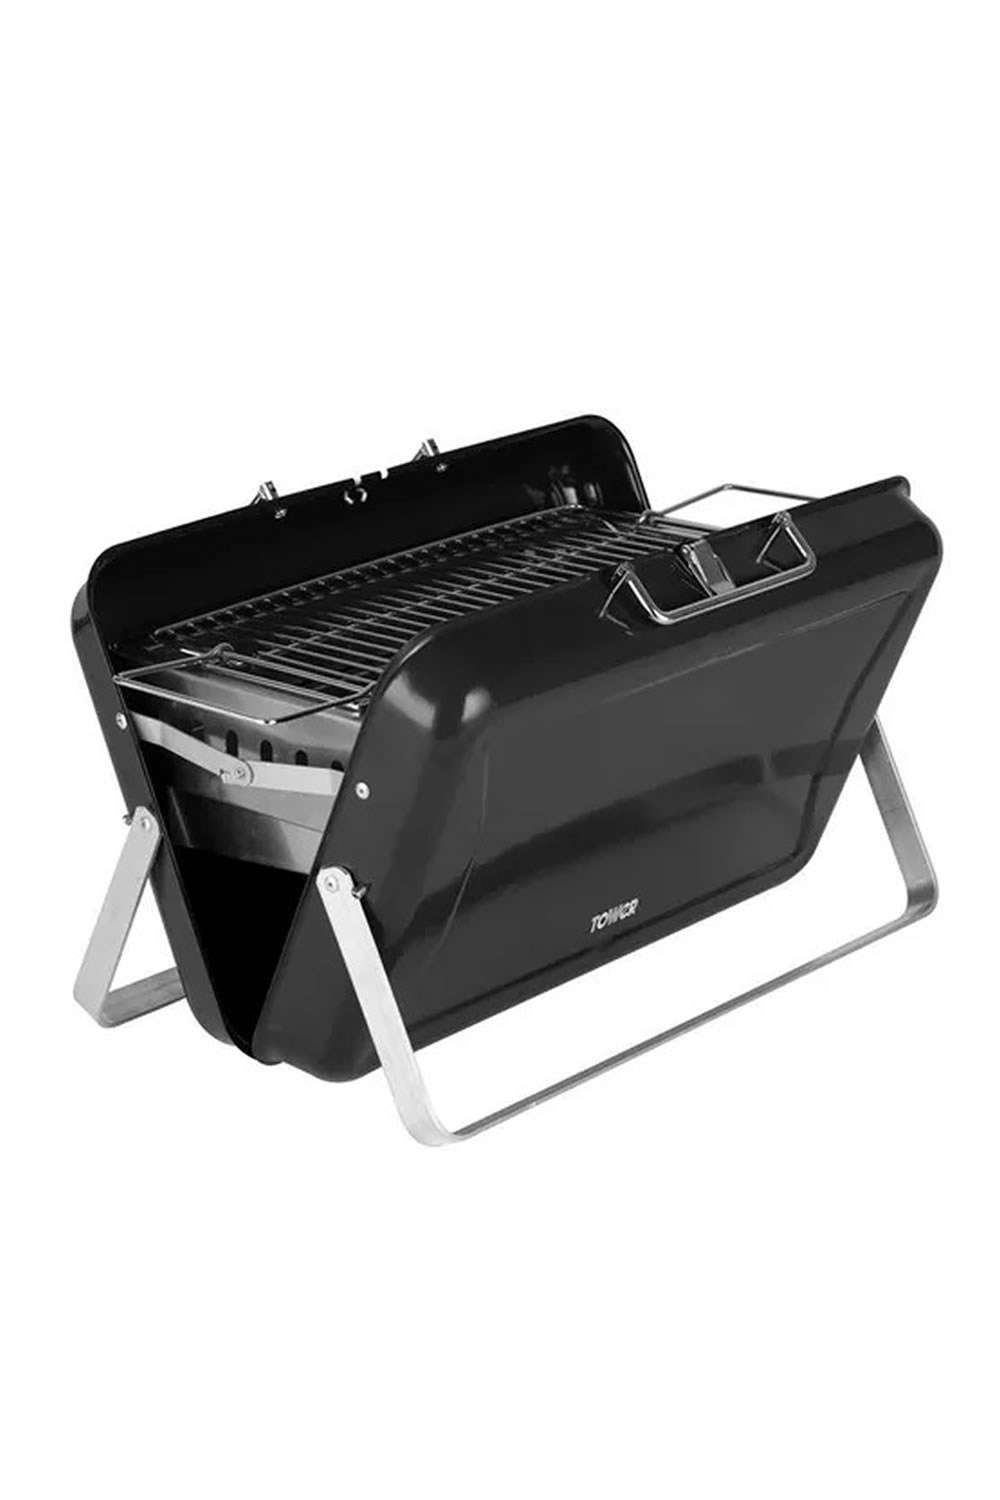 Day Tripper Portable Camping BBQ -